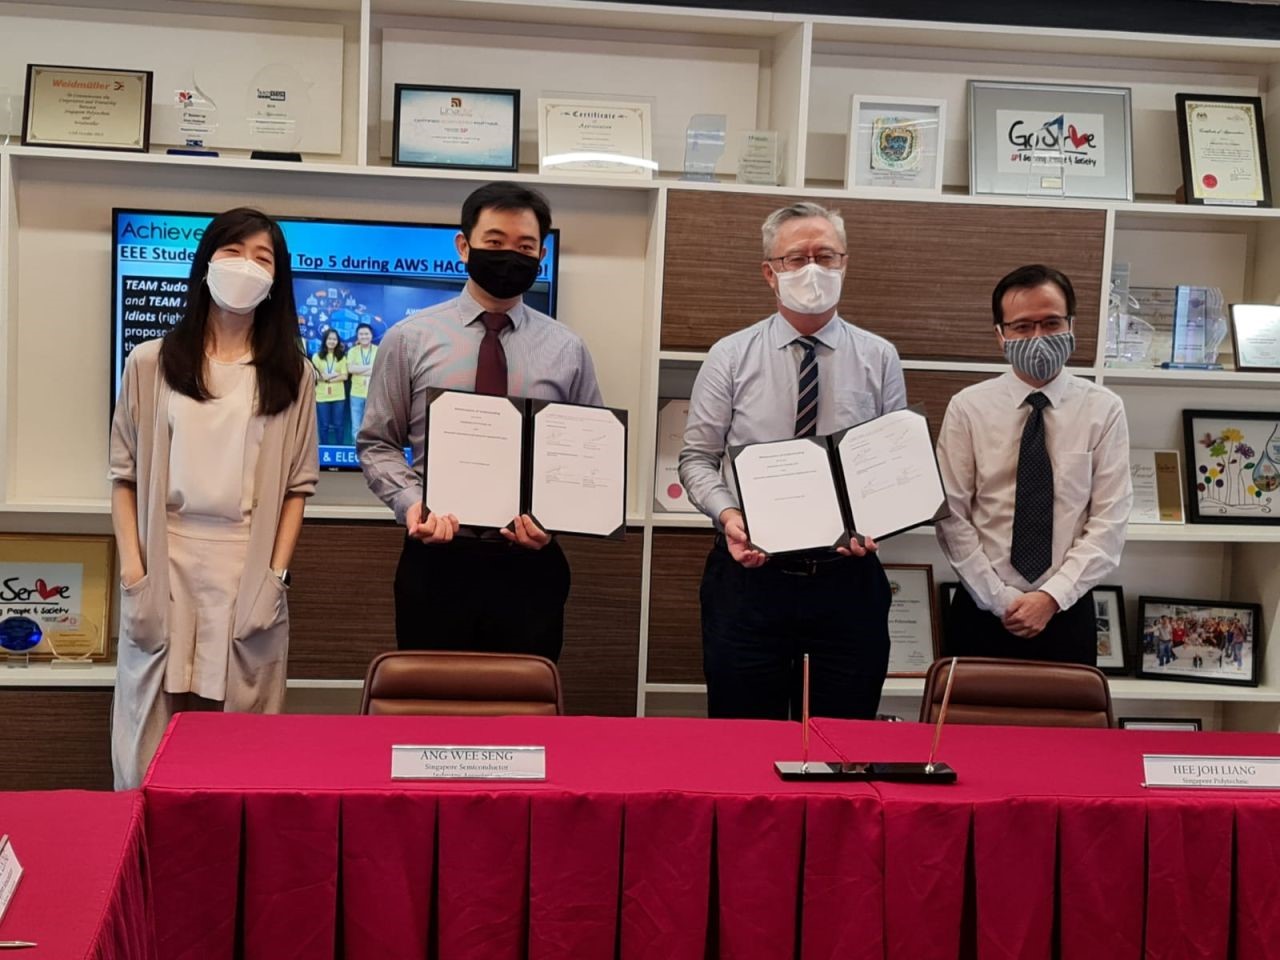 MoU signing between Singapore Polytechnic (SP) and Singapore Semiconductor Industry Association (SSIA)